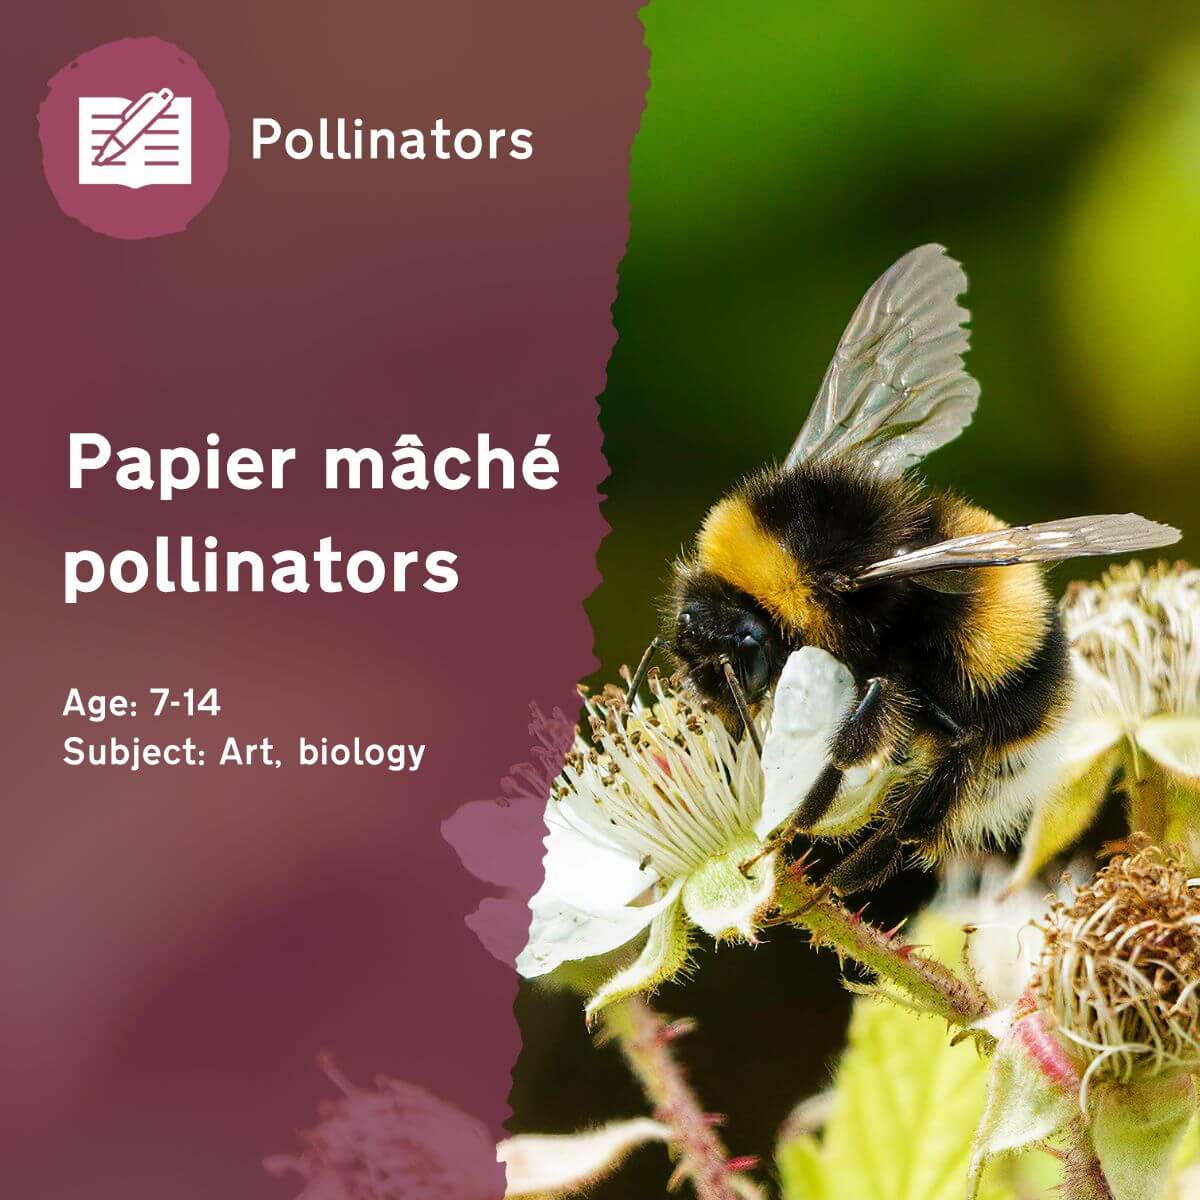 Create giant bumblebees with our 'Papier Mâché Pollinators' outdoor lesson idea! Not only will pupils make beautiful decorations for the classroom ceiling, but they will consolidate their knowledge of pollinator anatomy.This outdoor lesson idea is in PDF format. When you click the 'download' button, the PDF file will be immediately downloaded to your designated folder — usually the 'Downloads' folder.